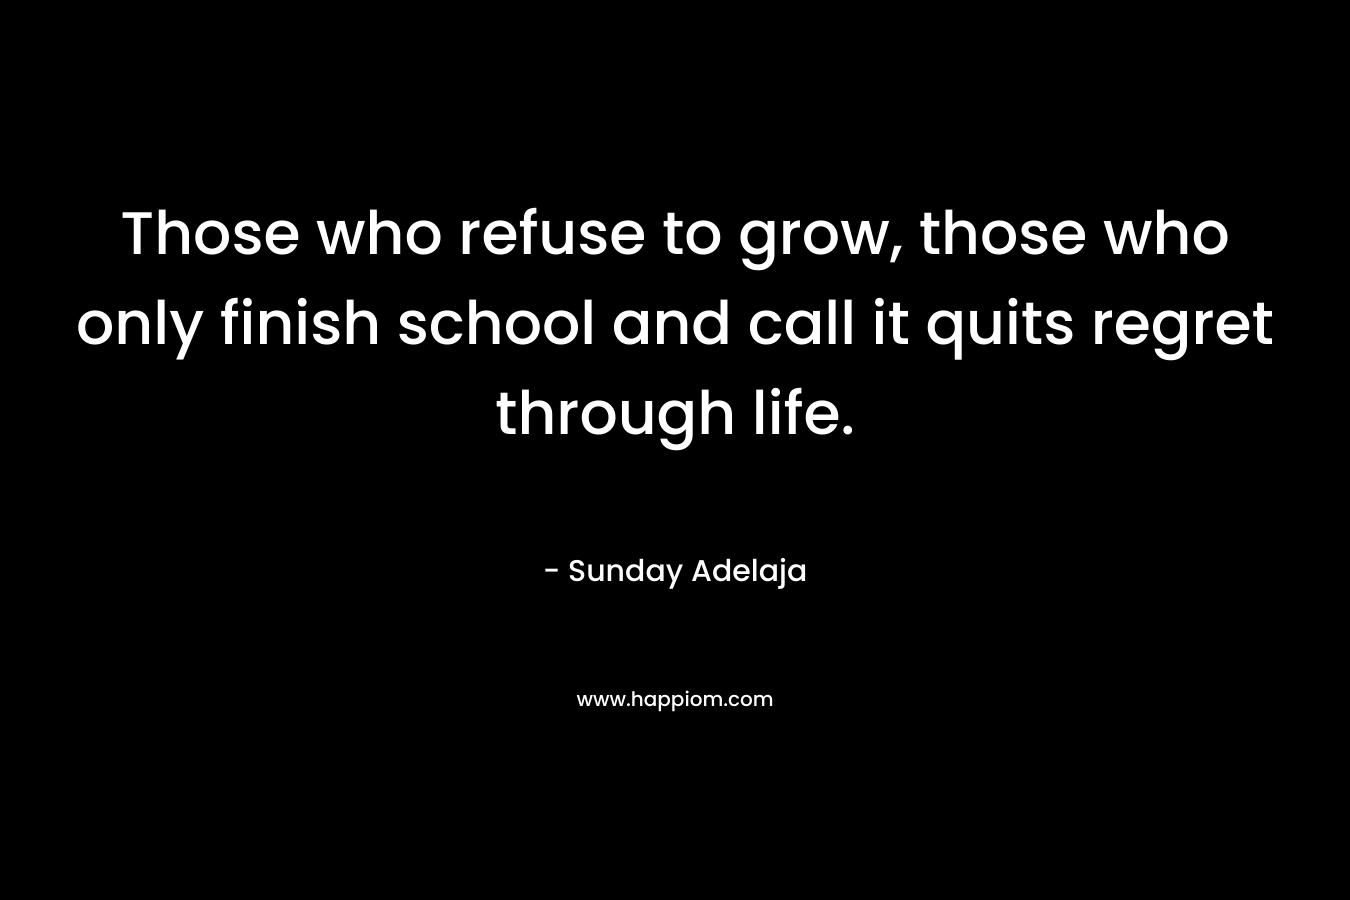 Those who refuse to grow, those who only finish school and call it quits regret through life. – Sunday Adelaja